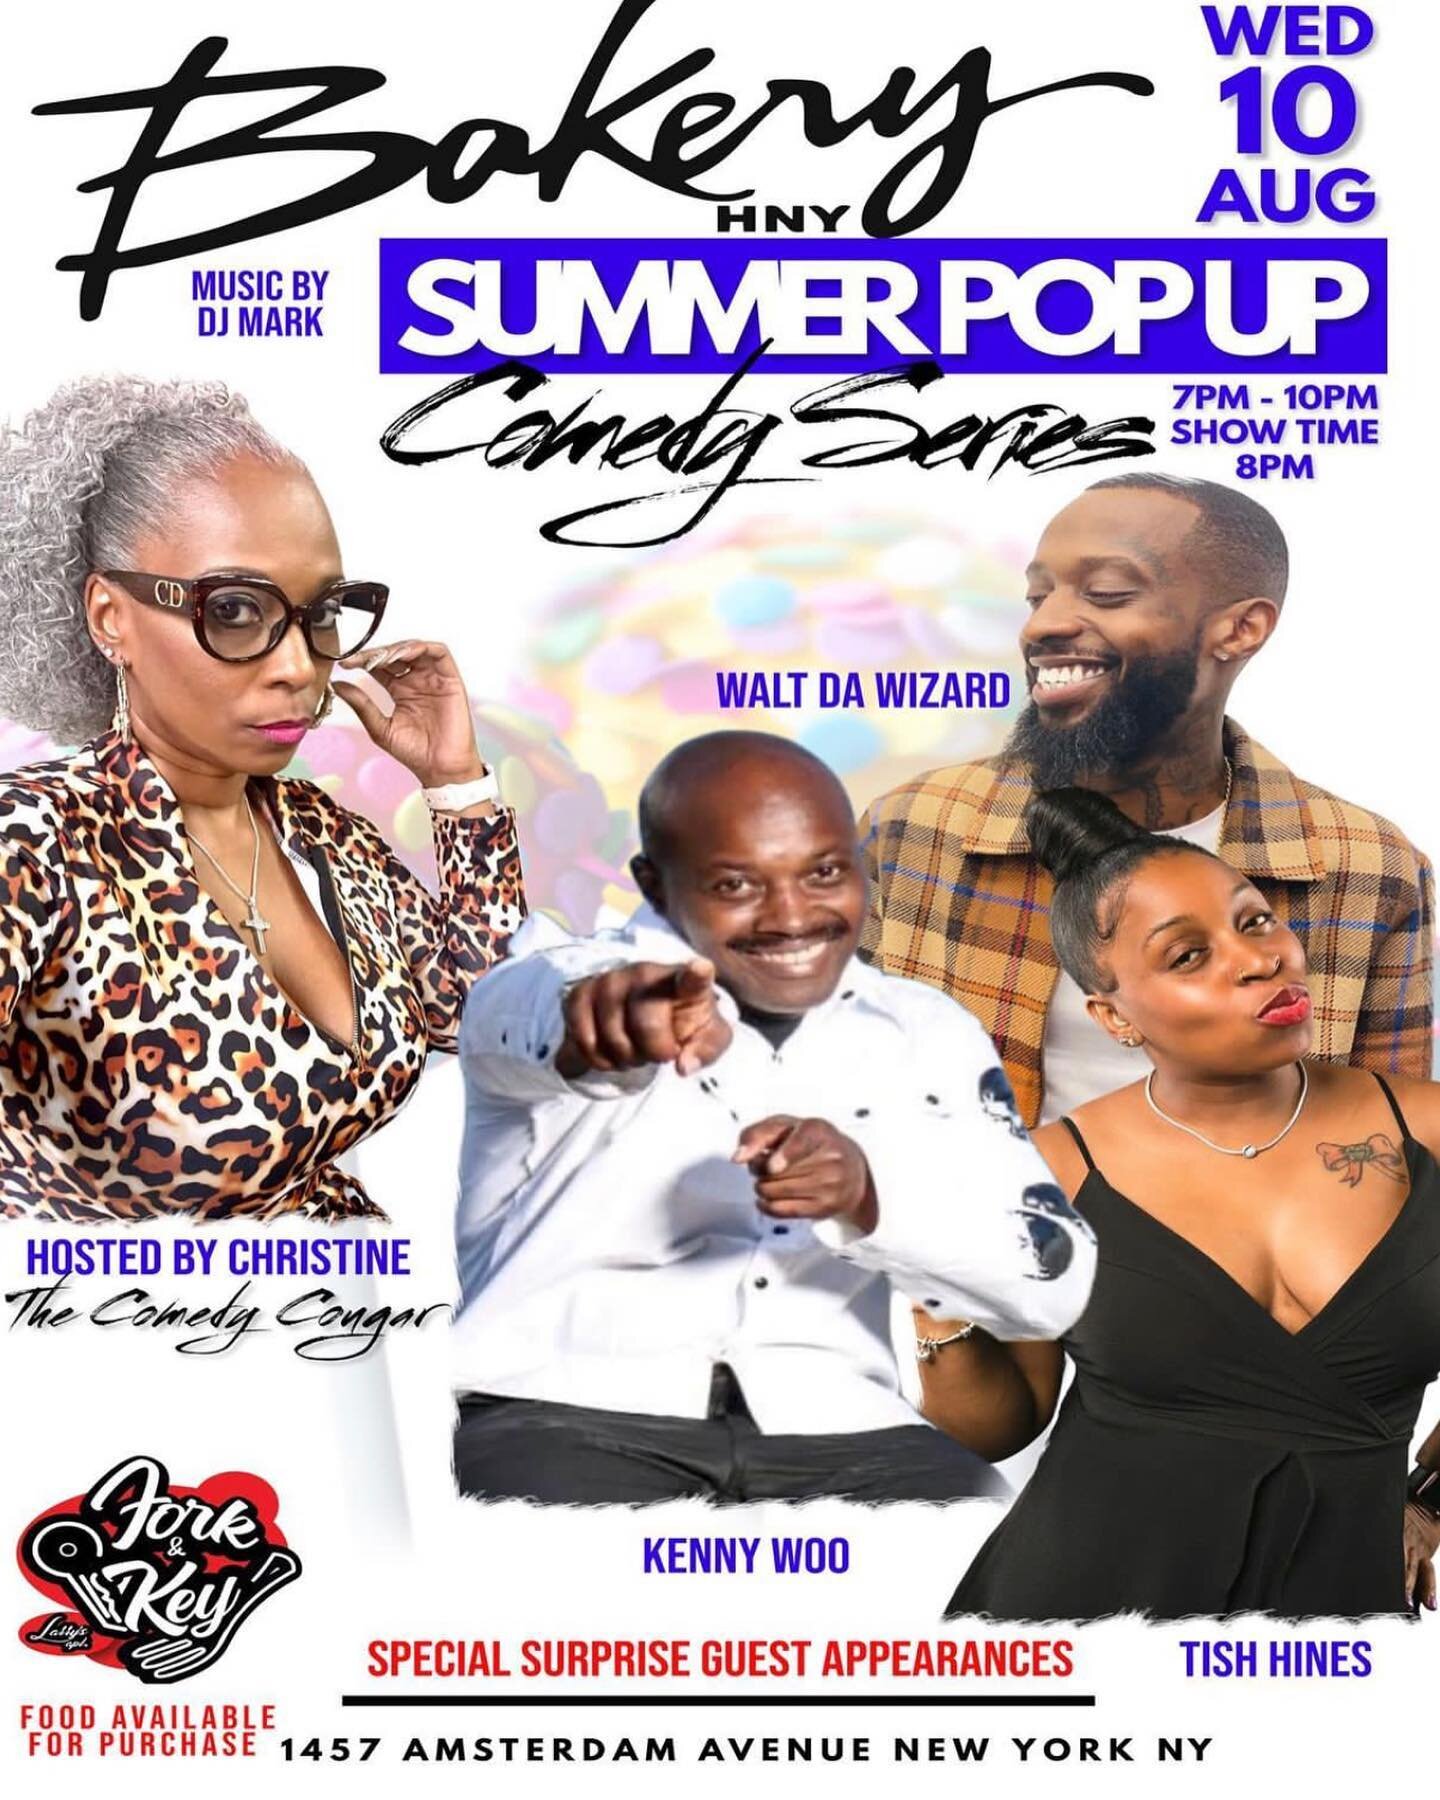 🎯THIS WEEK WED. AUG. 10th @bakery.hny Summer Pop-Up Comedy Series 🎭
Host @christinecarolyncomedy
@thecomedycougar 🐾
With Comedians @da_wizrd @comedianwoo1 @iam_tishhines 
Also we always get some special surprise guess comedians in the shop 
&bull;